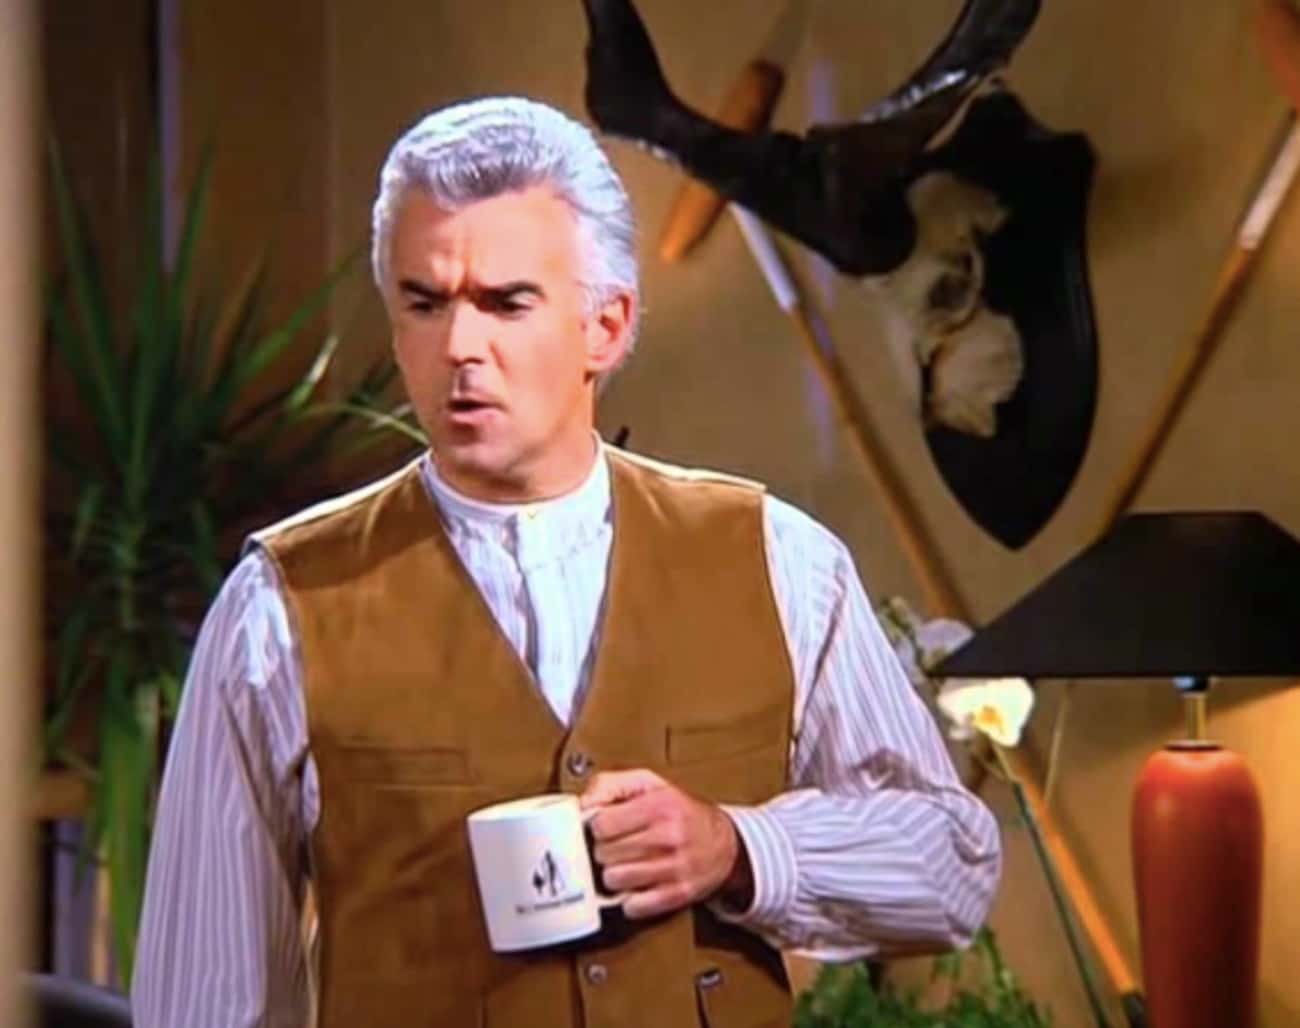 The Actor Who Played J. Peterman Is Actually Part Owner of J. Peterman